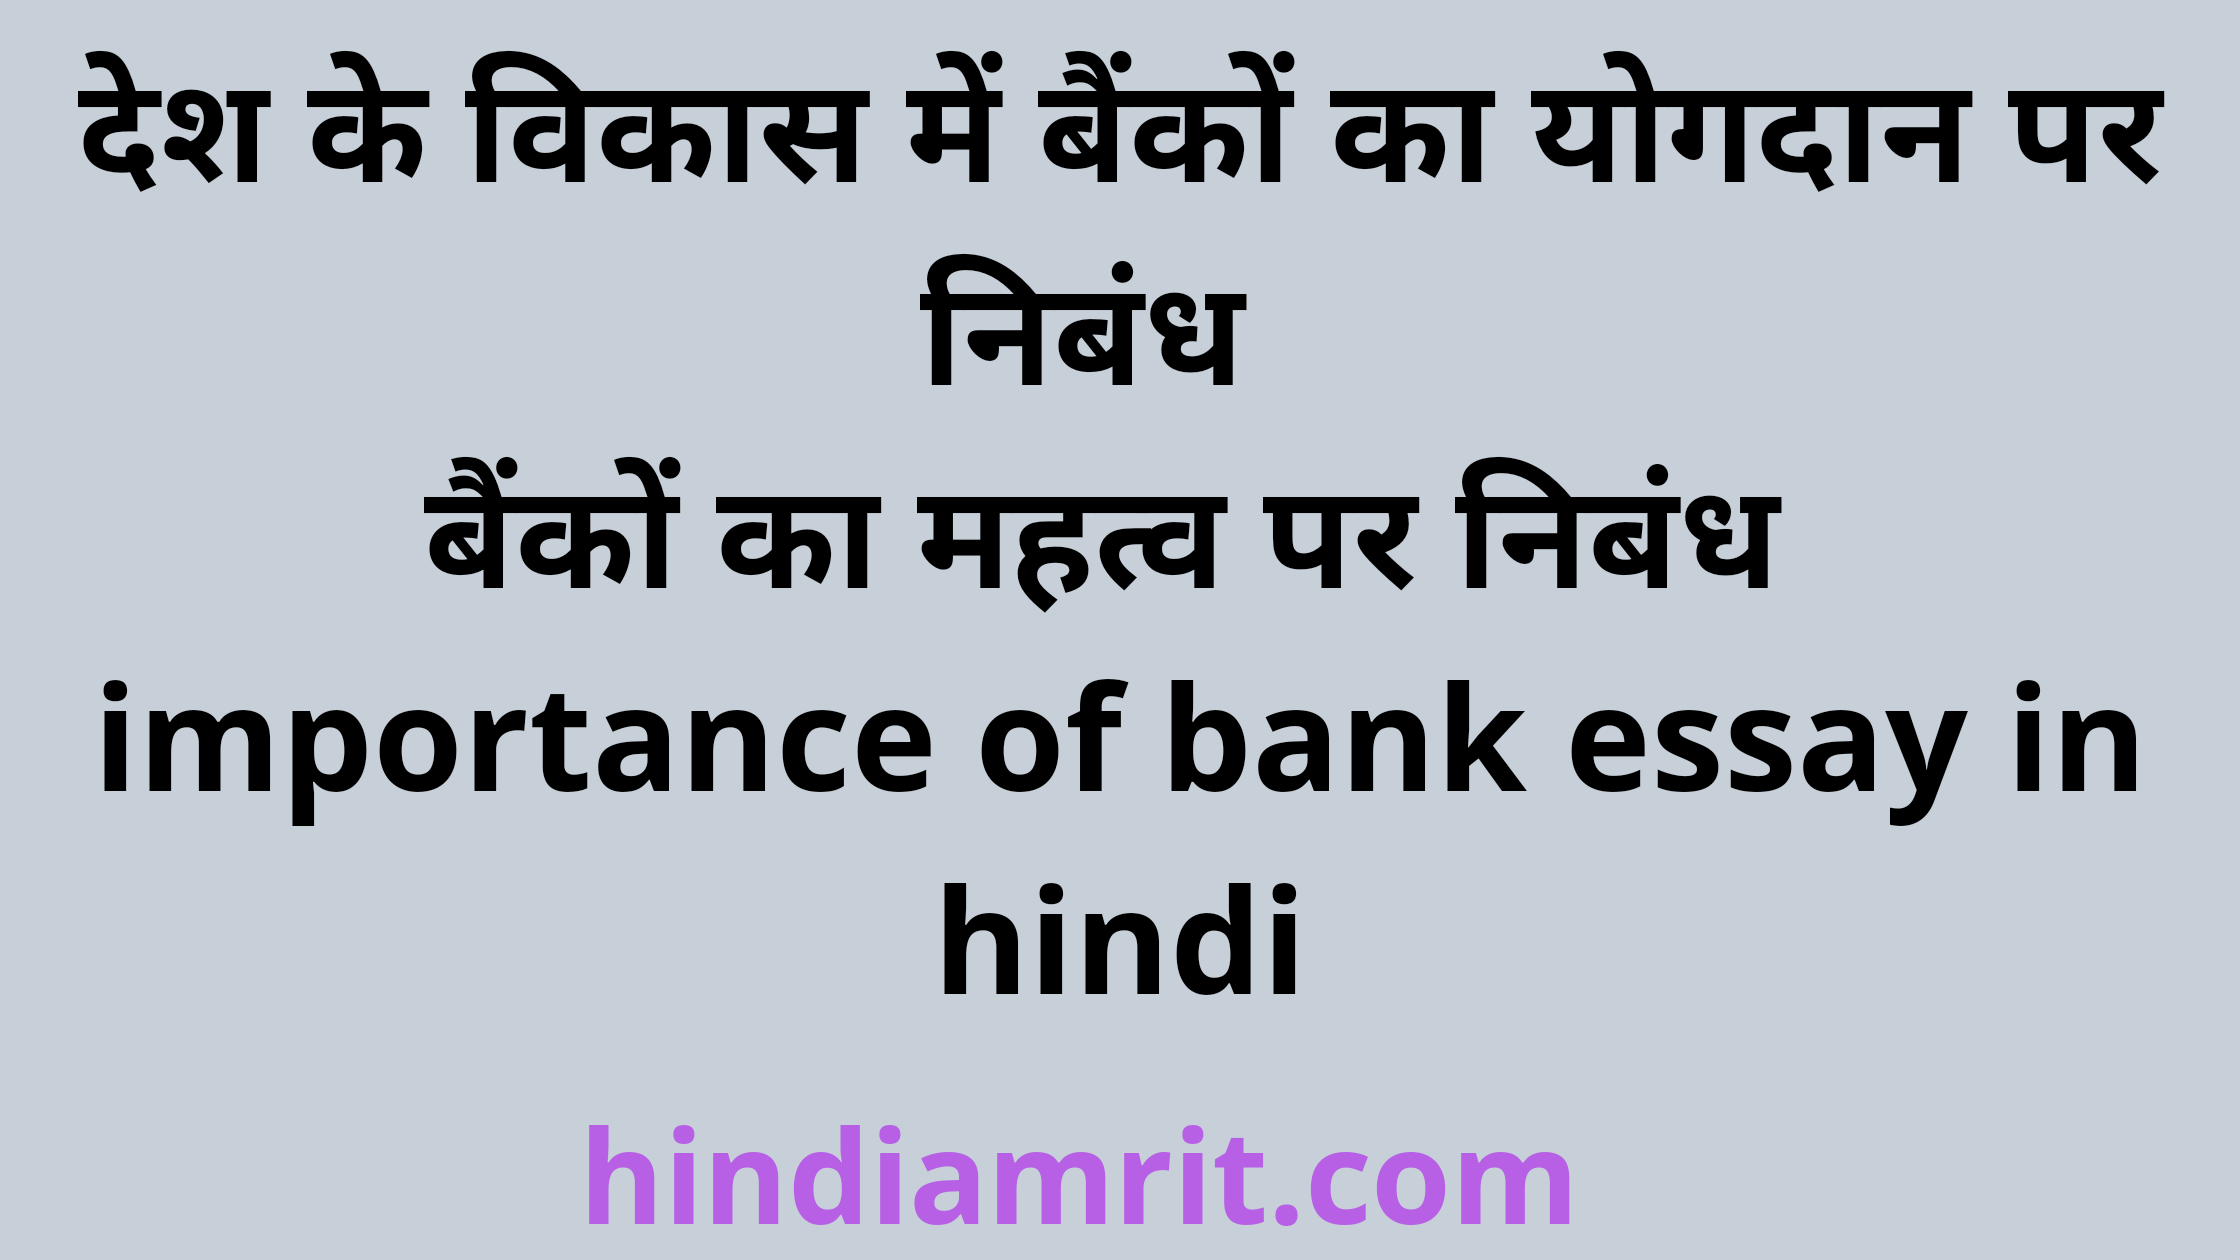 a visit to a bank essay in hindi